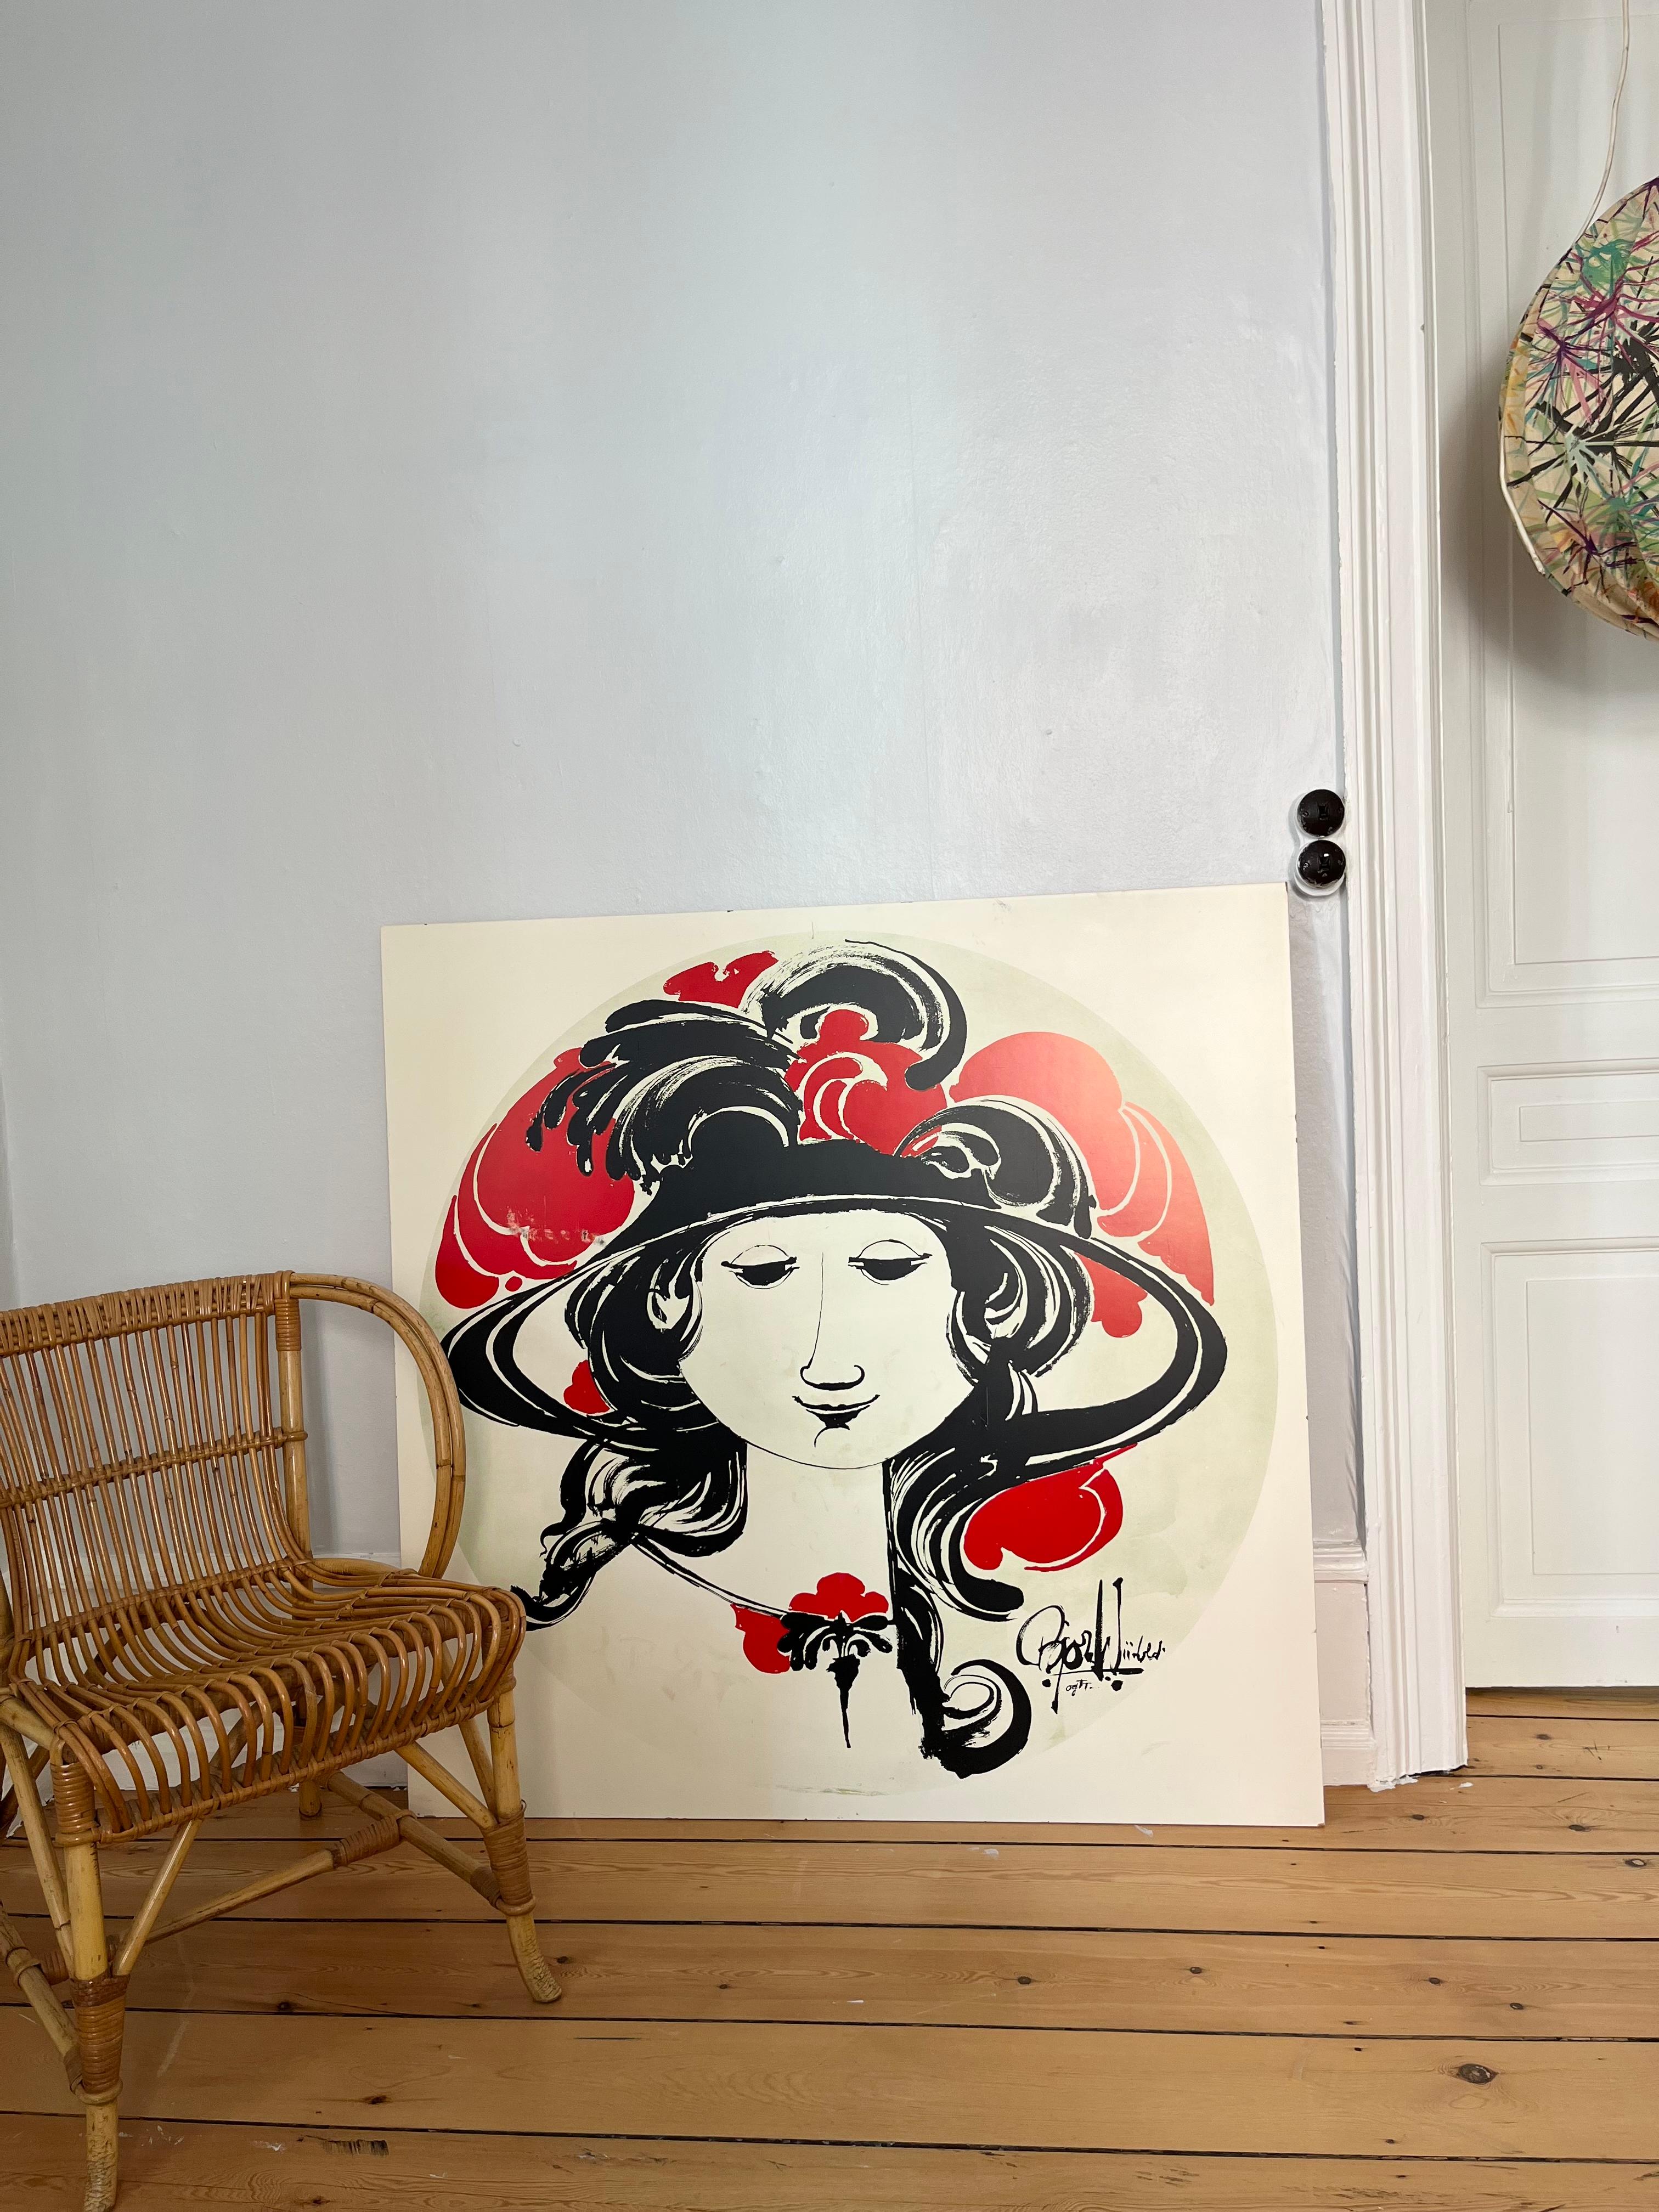 Made for the Admiral Hotel in Copenhagen, this rare large scale silk screen print was made by Danish artist Bjørn Wiinblad (1918-2006) in the 1970s as part of a series for the hotel's decor. 

Mounted on 1 cm thick wood, it measures 110 x 110 cm